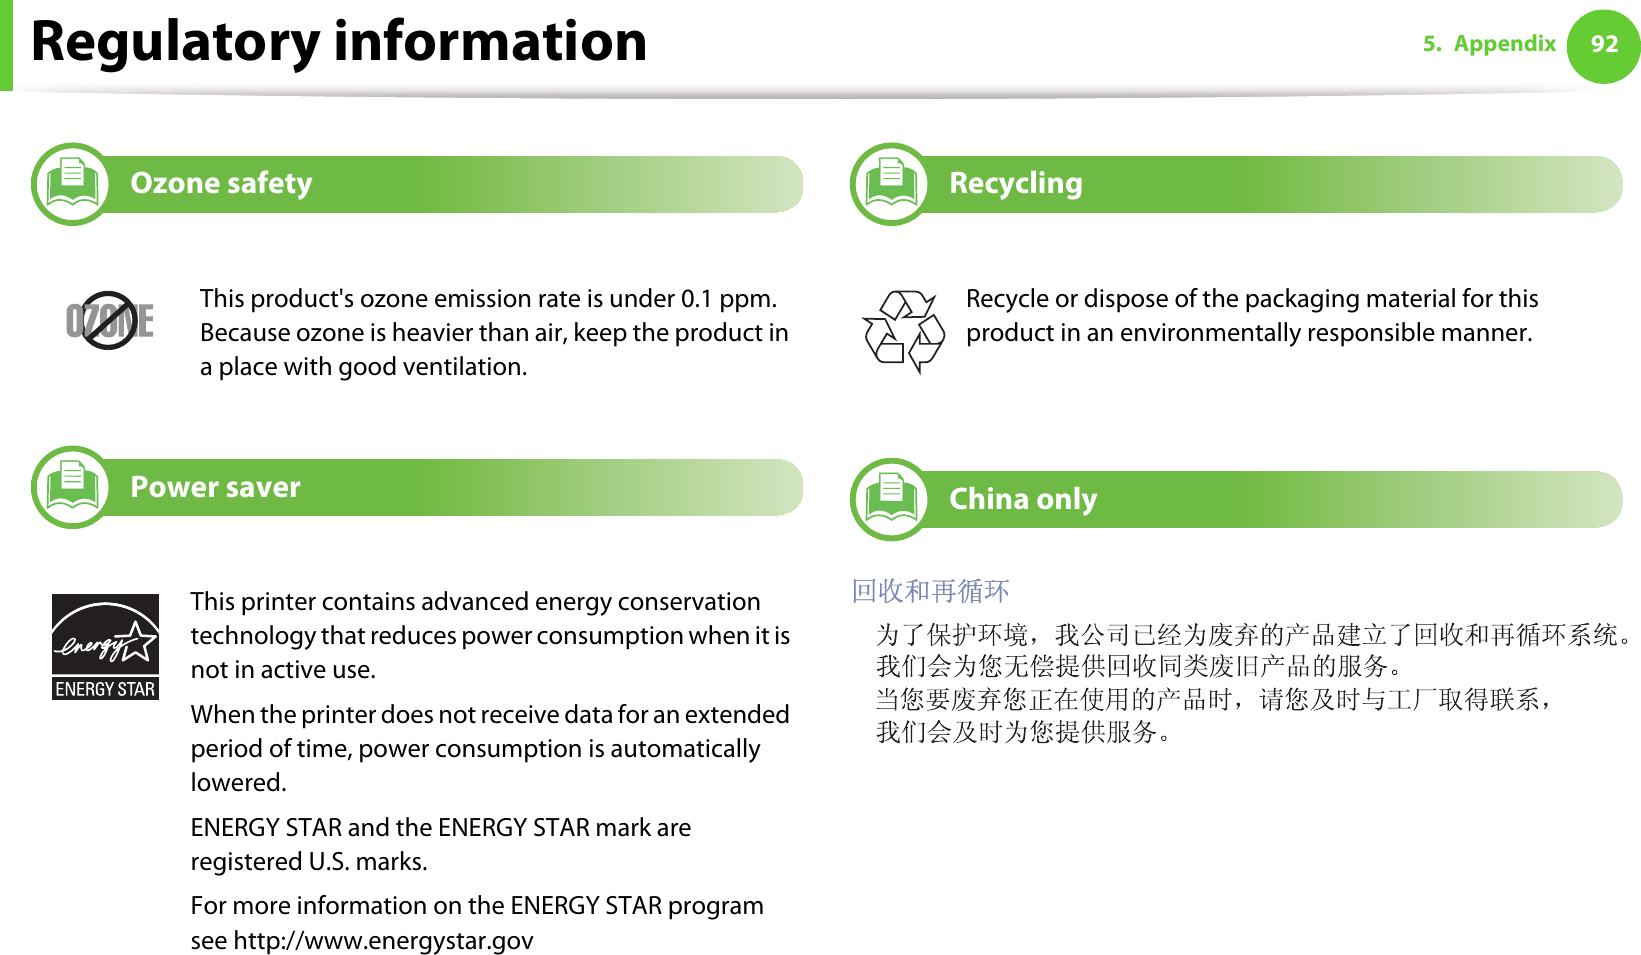 Regulatory information 925. Appendix7Ozone safety8Power saver9Recycling10 China onlyThis product&apos;s ozone emission rate is under 0.1 ppm. Because ozone is heavier than air, keep the product in a place with good ventilation.This printer contains advanced energy conservation technology that reduces power consumption when it is not in active use.When the printer does not receive data for an extended period of time, power consumption is automatically lowered. ENERGY STAR and the ENERGY STAR mark are registered U.S. marks. For more information on the ENERGY STAR program see http://www.energystar.govRecycle or dispose of the packaging material for this product in an environmentally responsible manner.